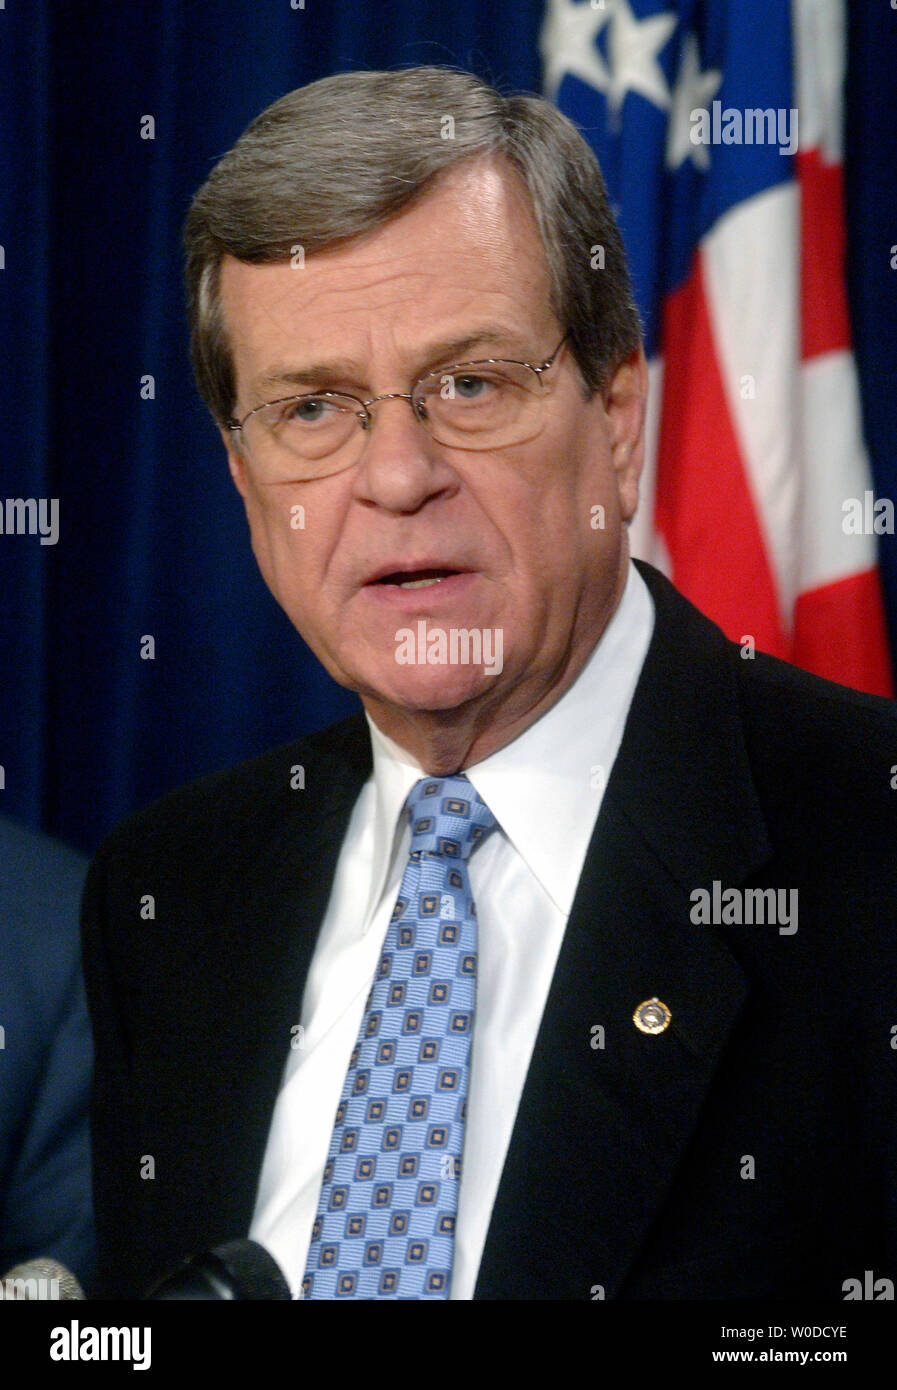 Assistant Minority Leader Trent Lott (R-MS) (C) speaks about the Senate GOP Agenda for the 110th Congress, in Washington on February 15, 2007. (UPI Photo/Kevin Dietsch) Stock Photo